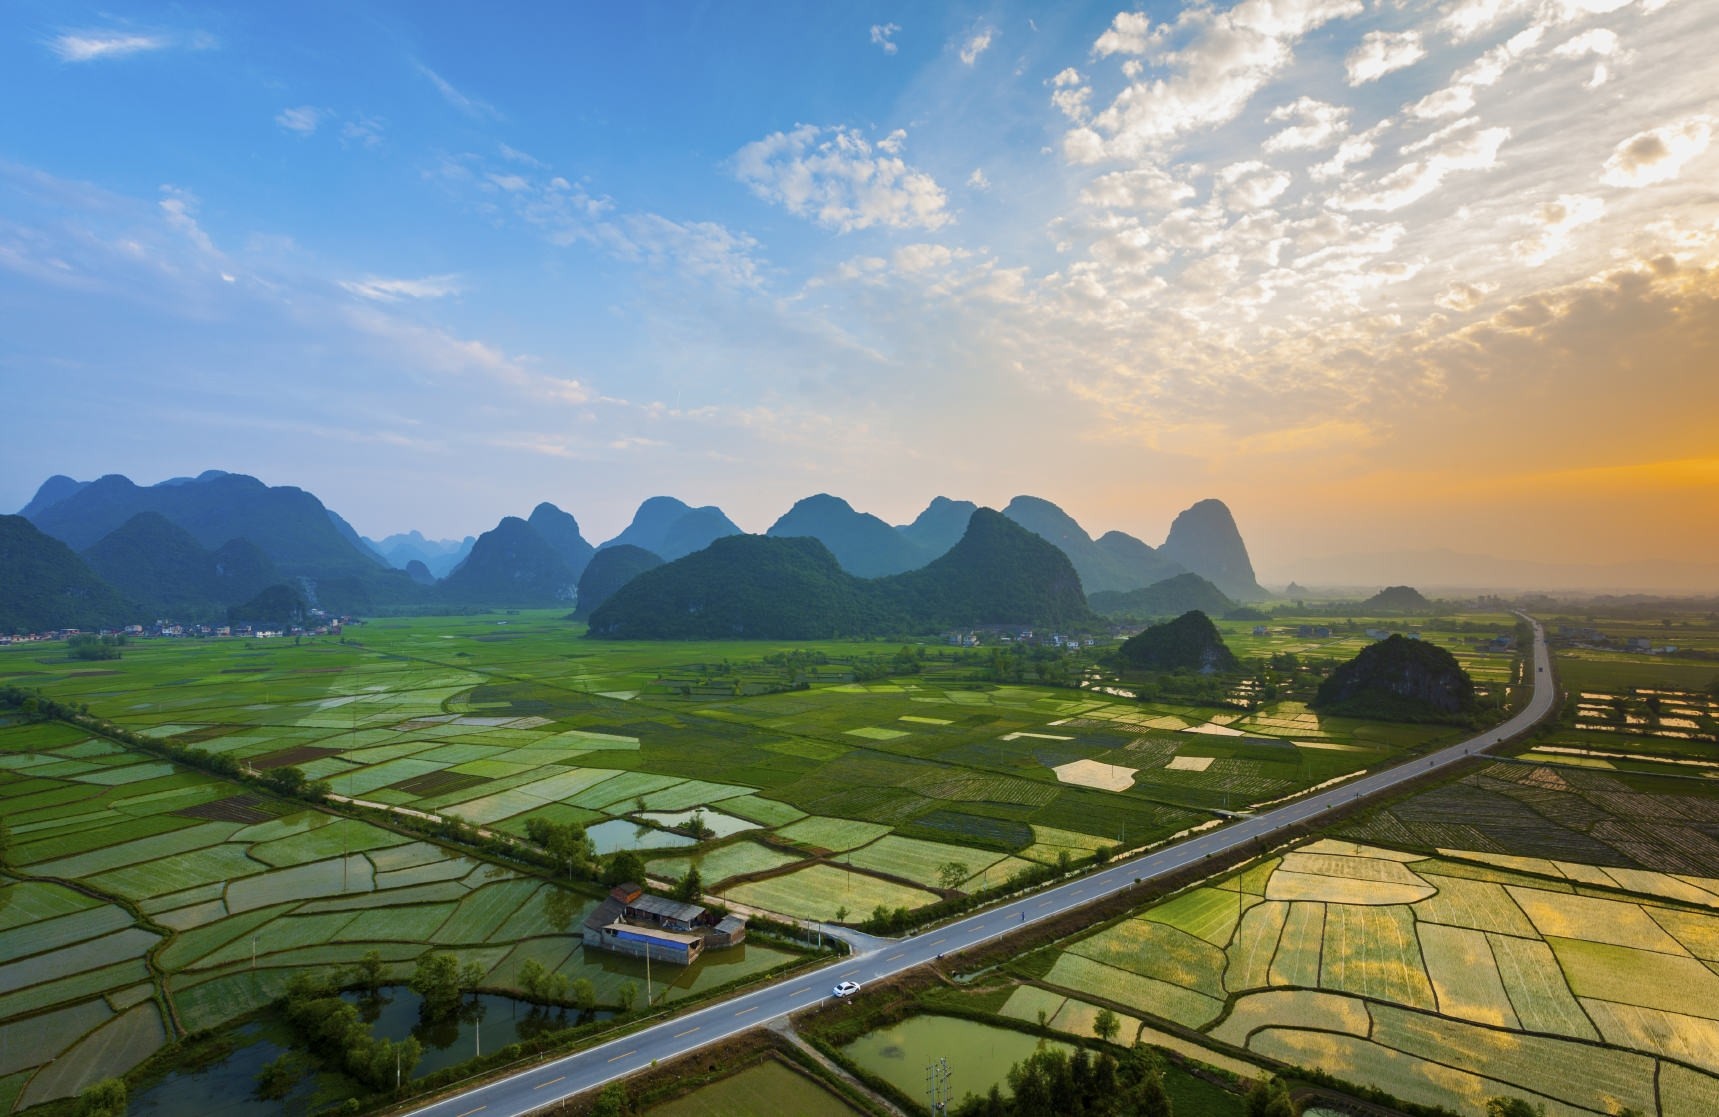 Landscape Photography Nature Field Mountains Sunset Road Clouds Village Guilin China Rice Paddy 1719x1117